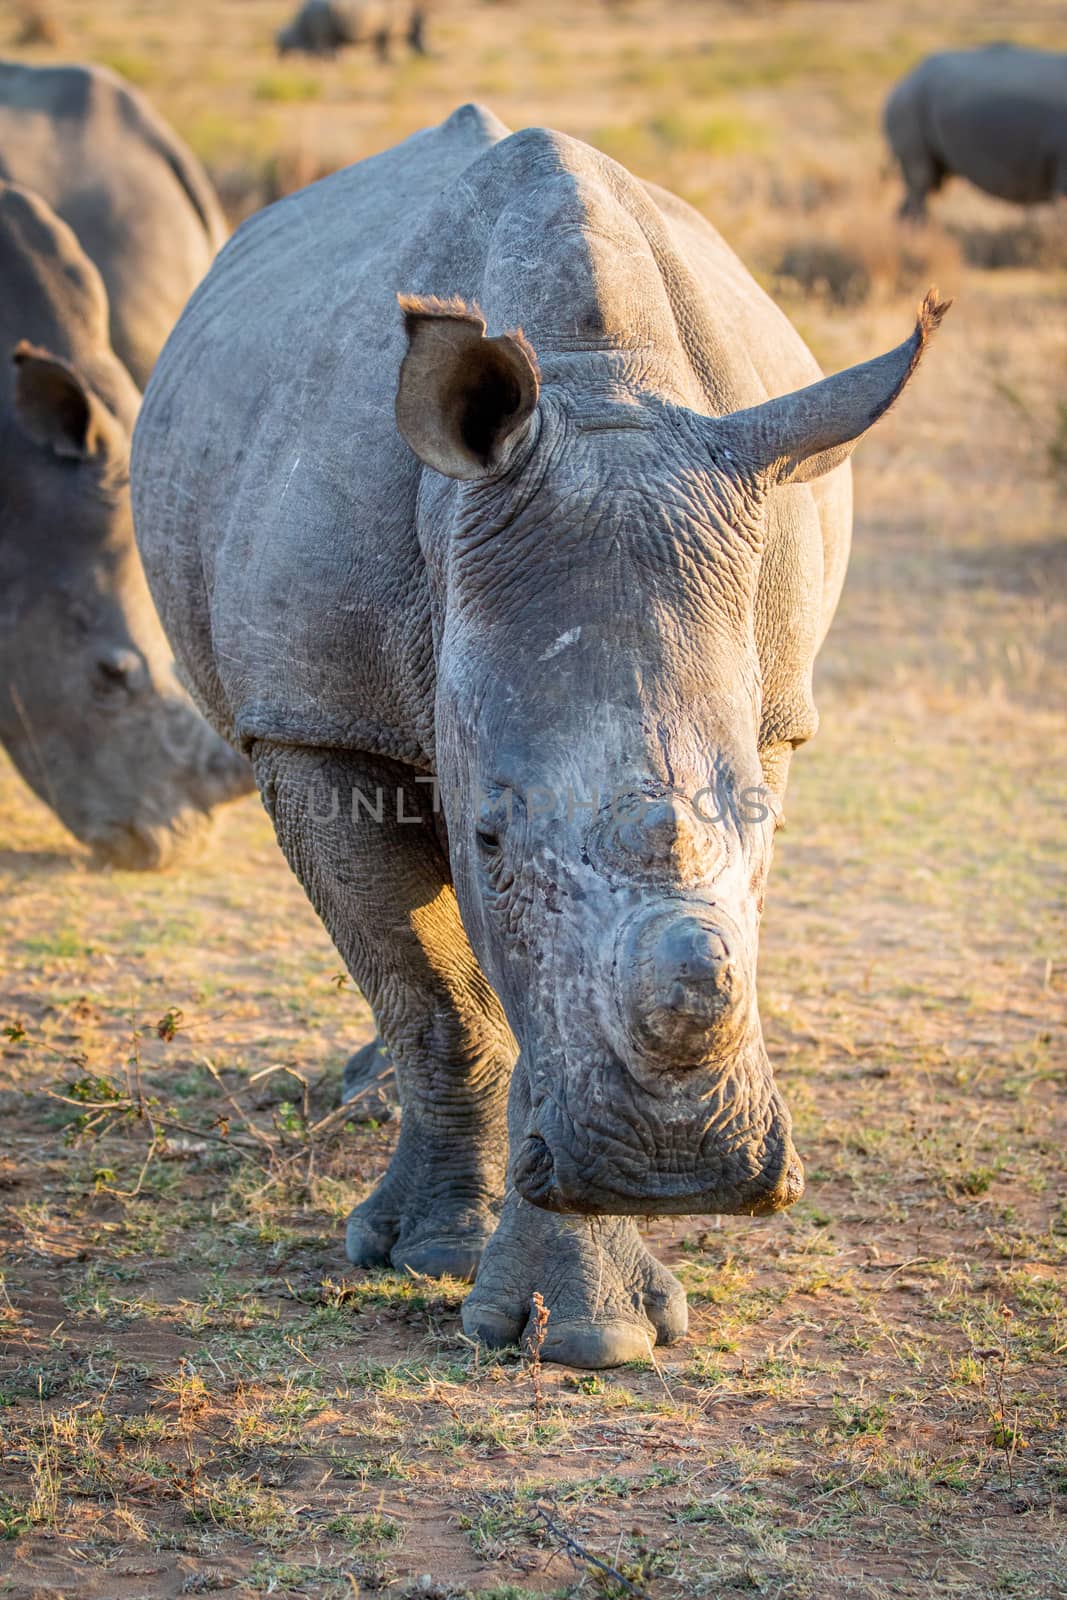 Close up of a White rhino starring at the camera, South Africa.